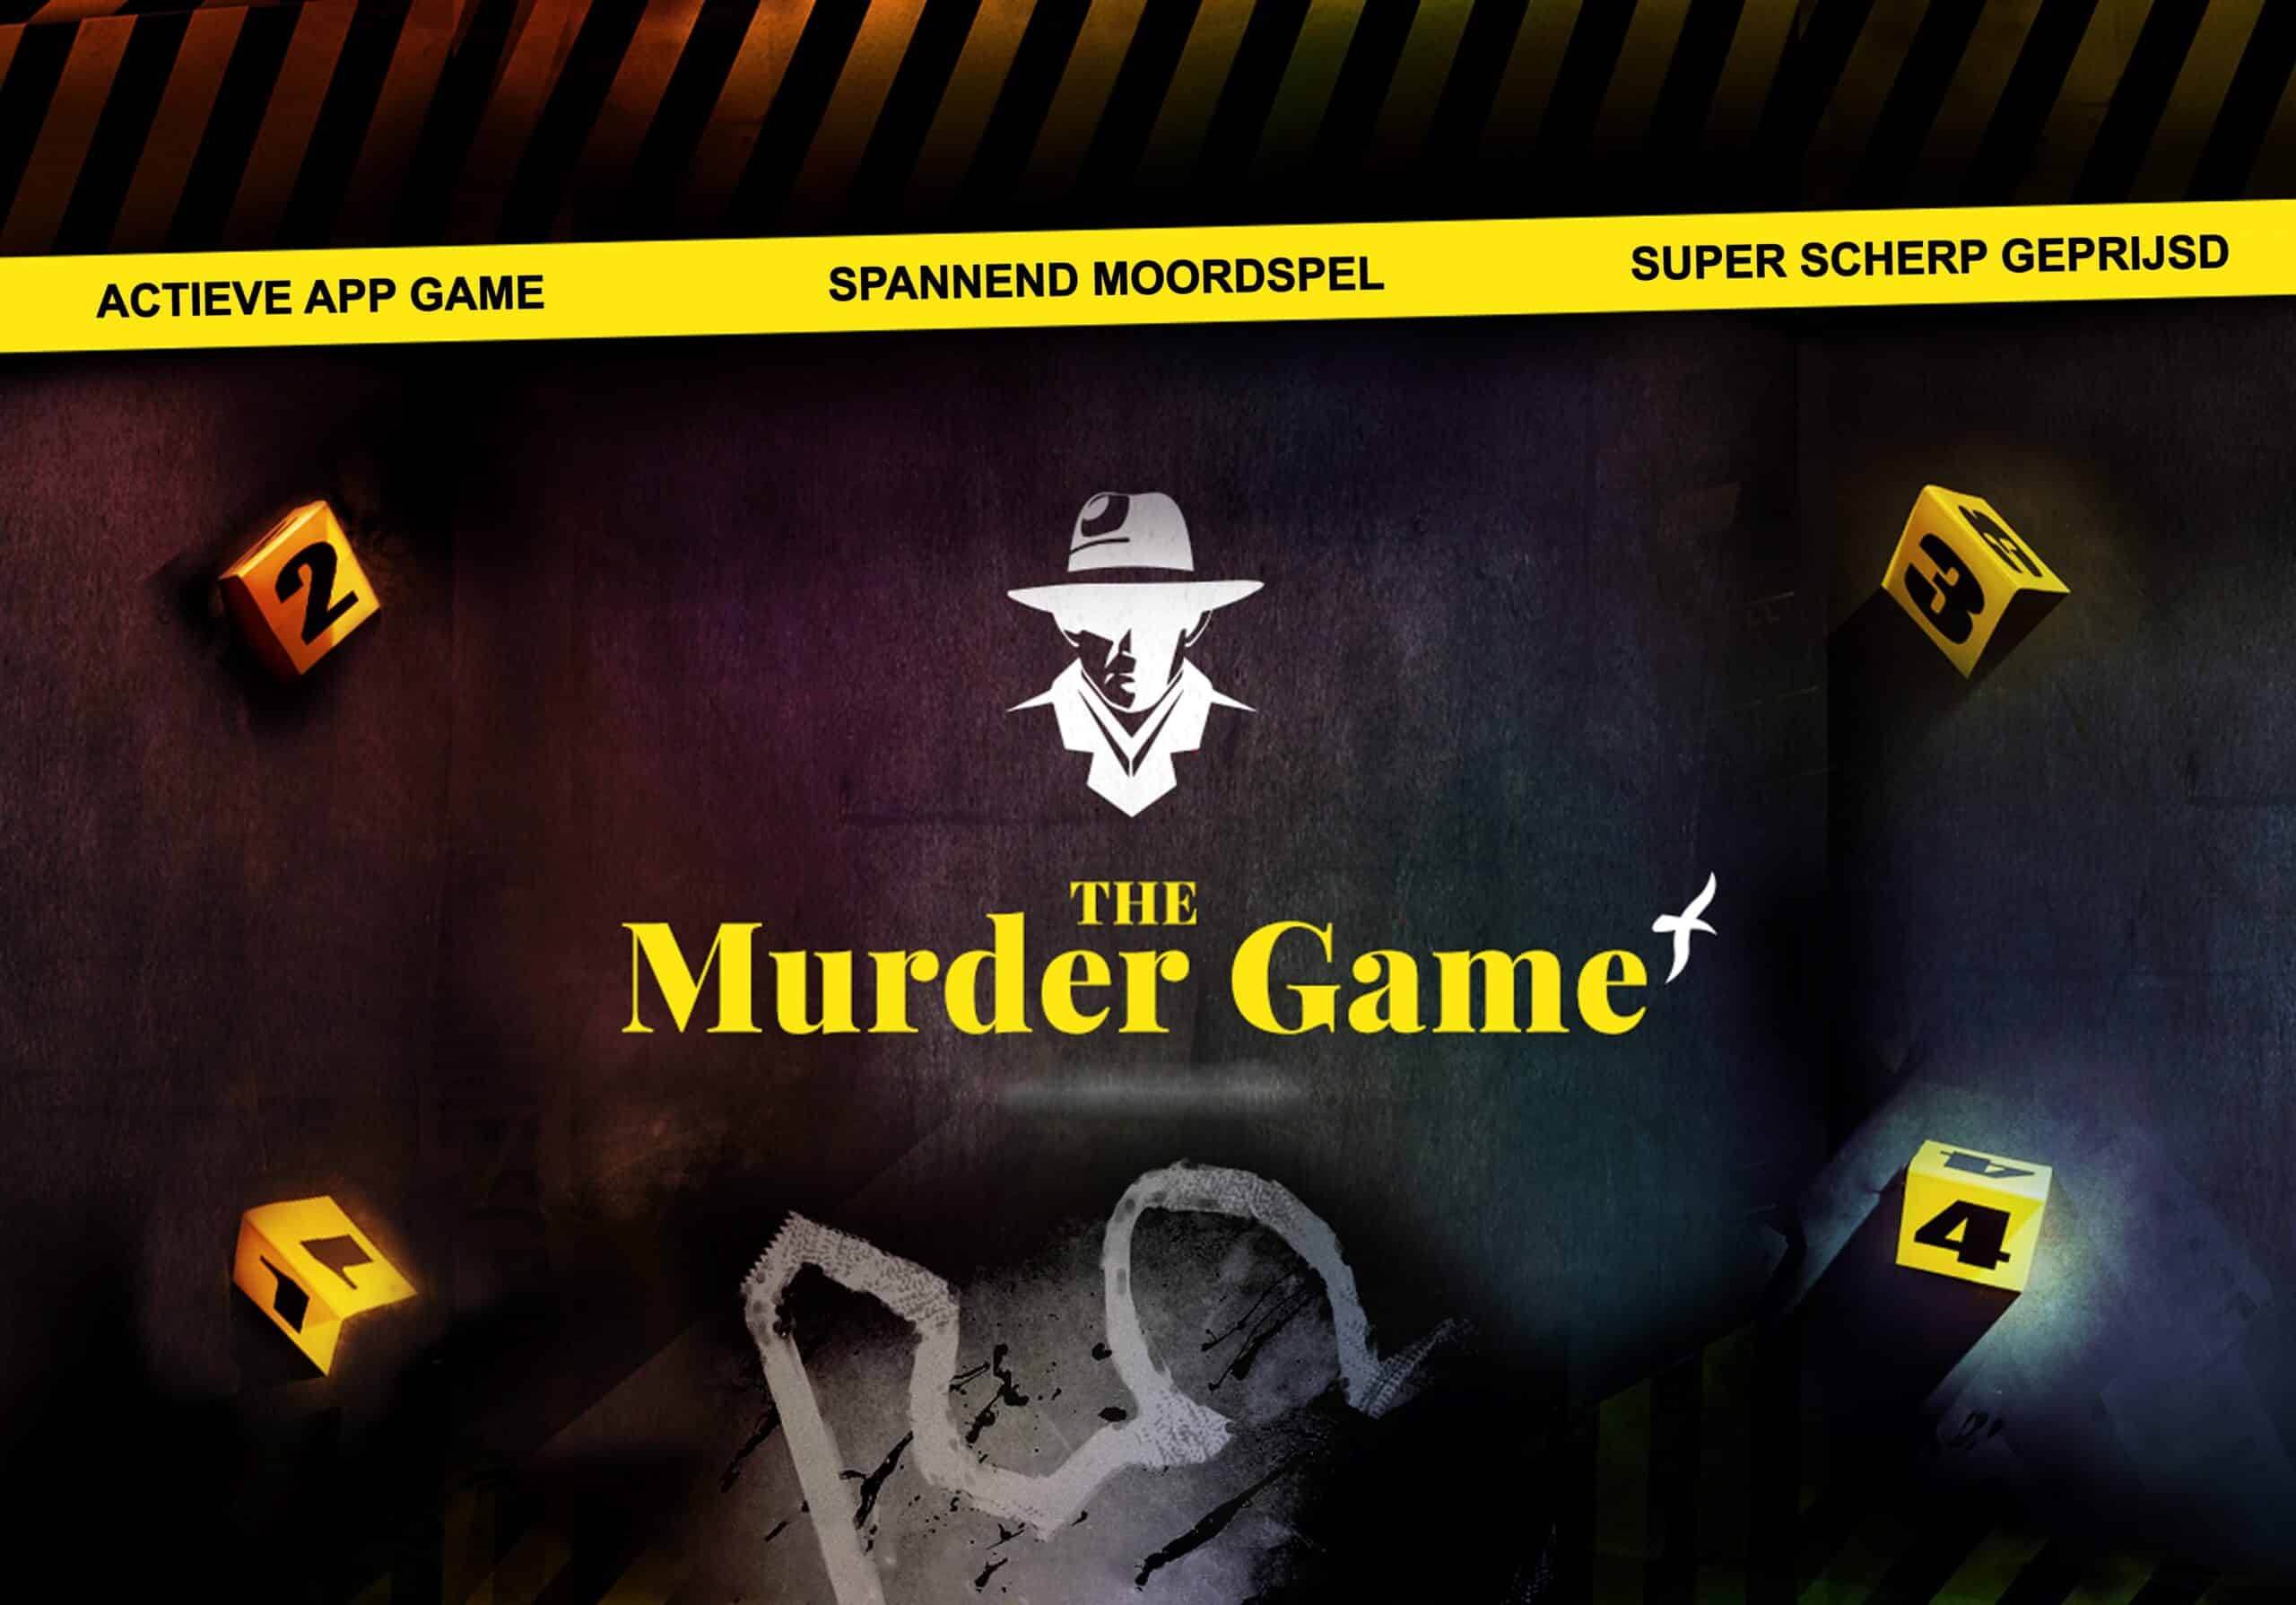 (NL) The Murder Game